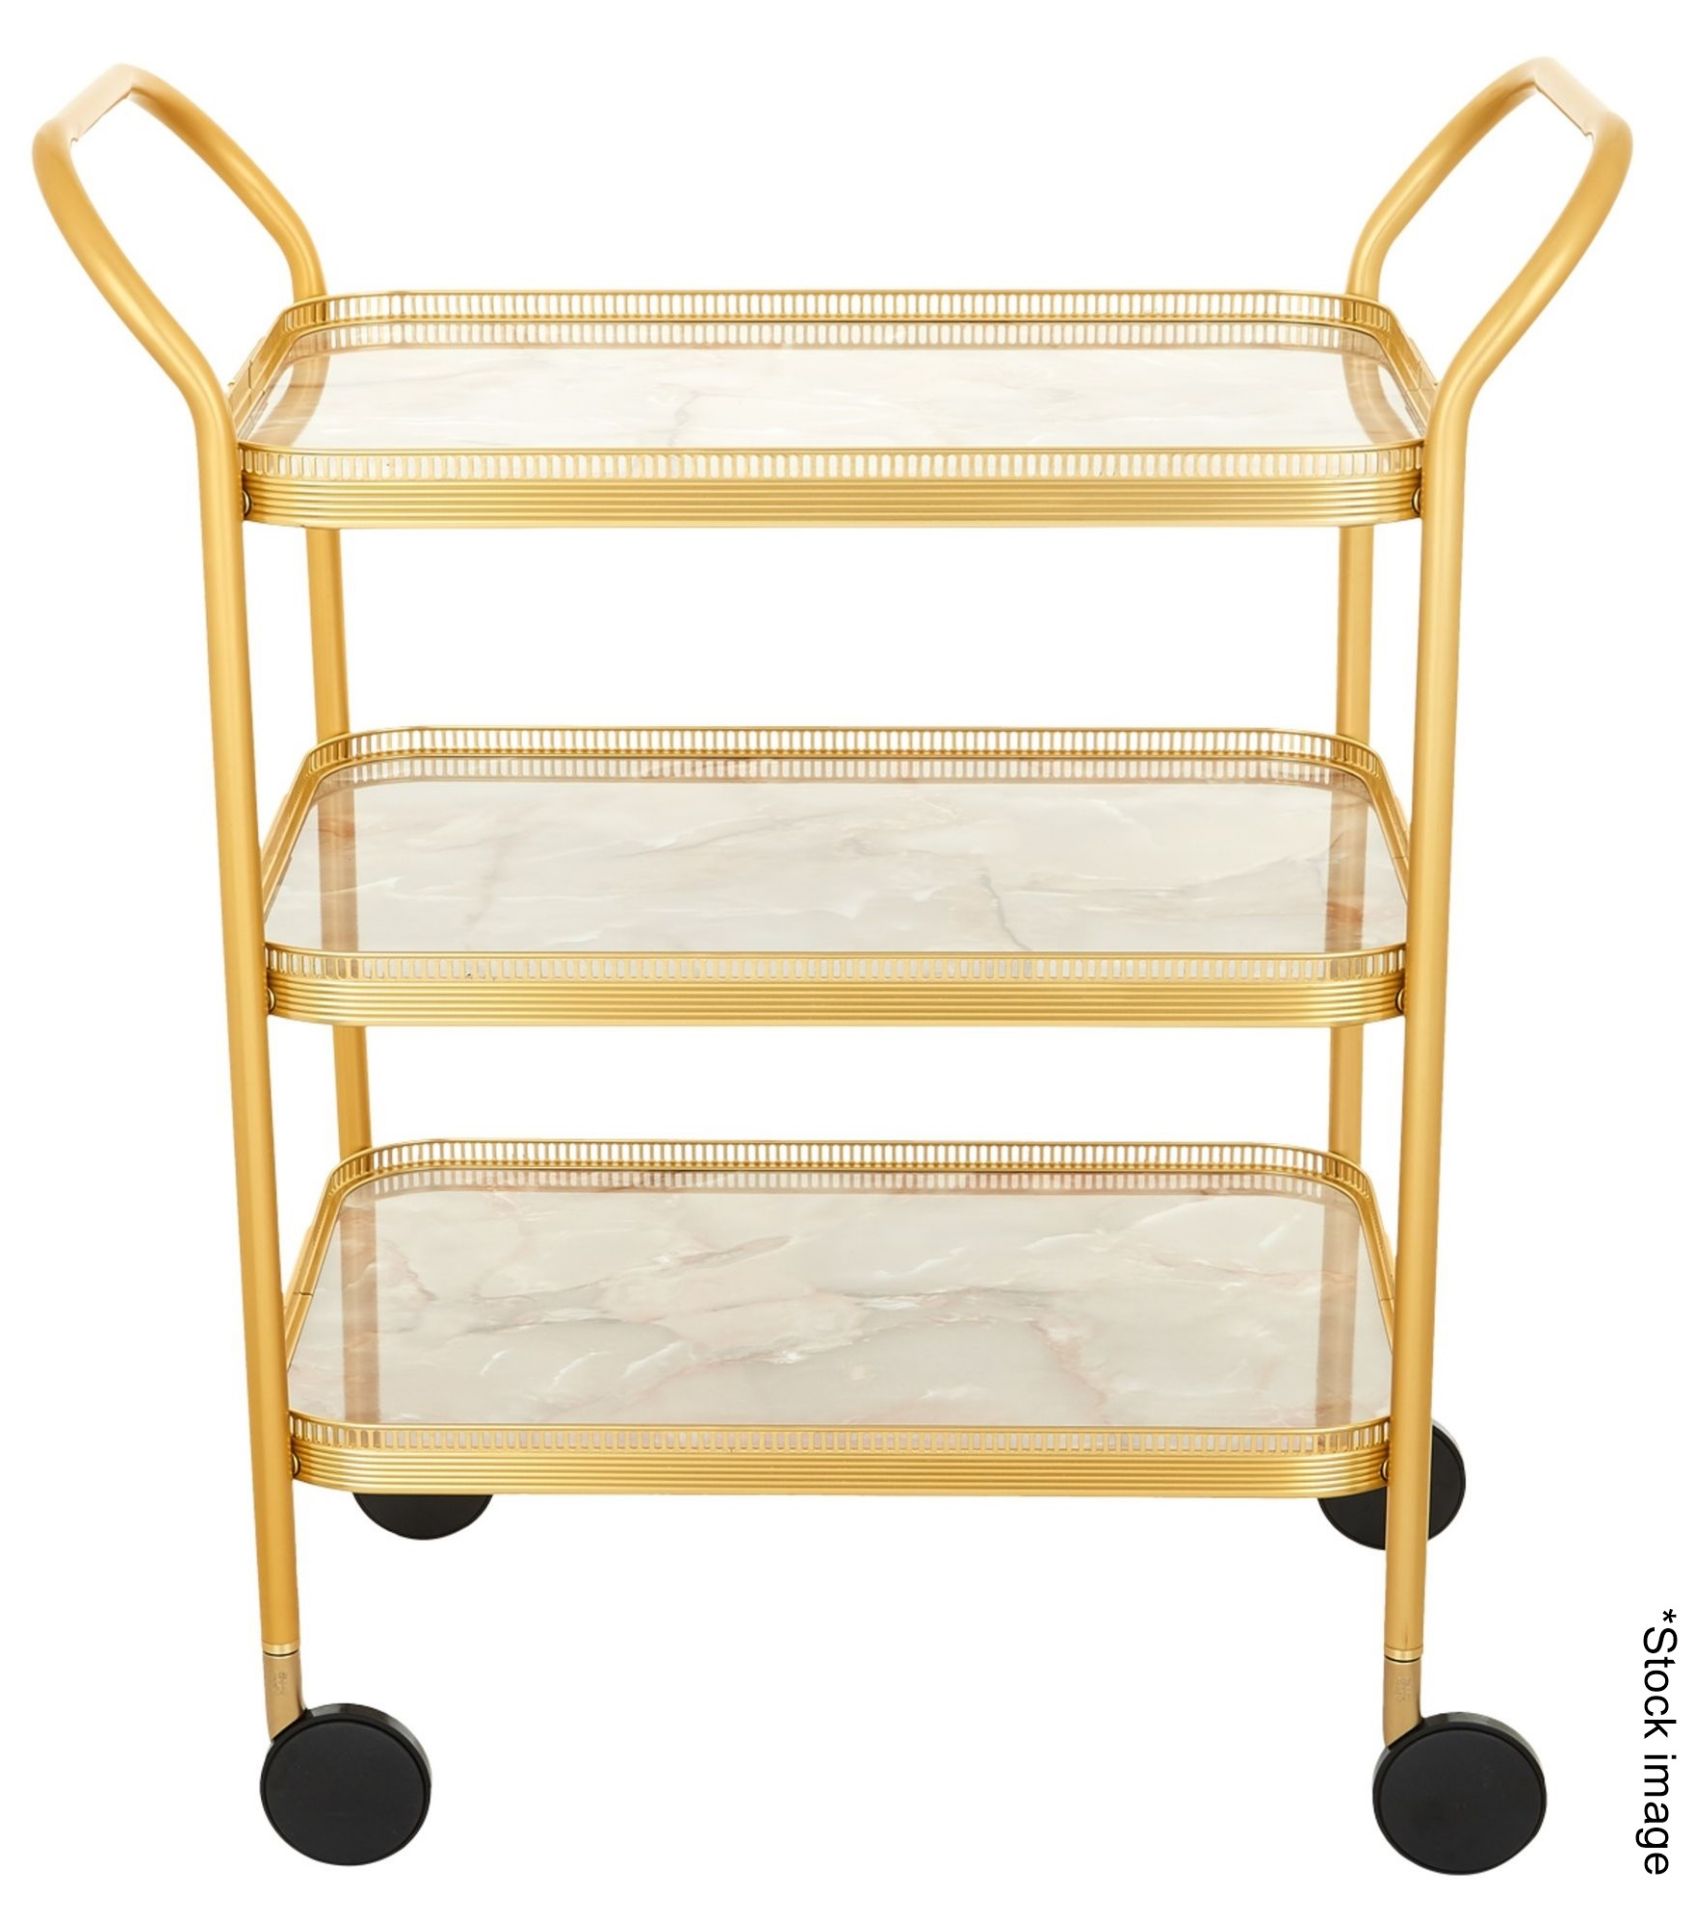 1 x KAYMET Triple Tier Drinks Trolley With A Gold / Onyx Marble Finish - Original Price £989.00 -